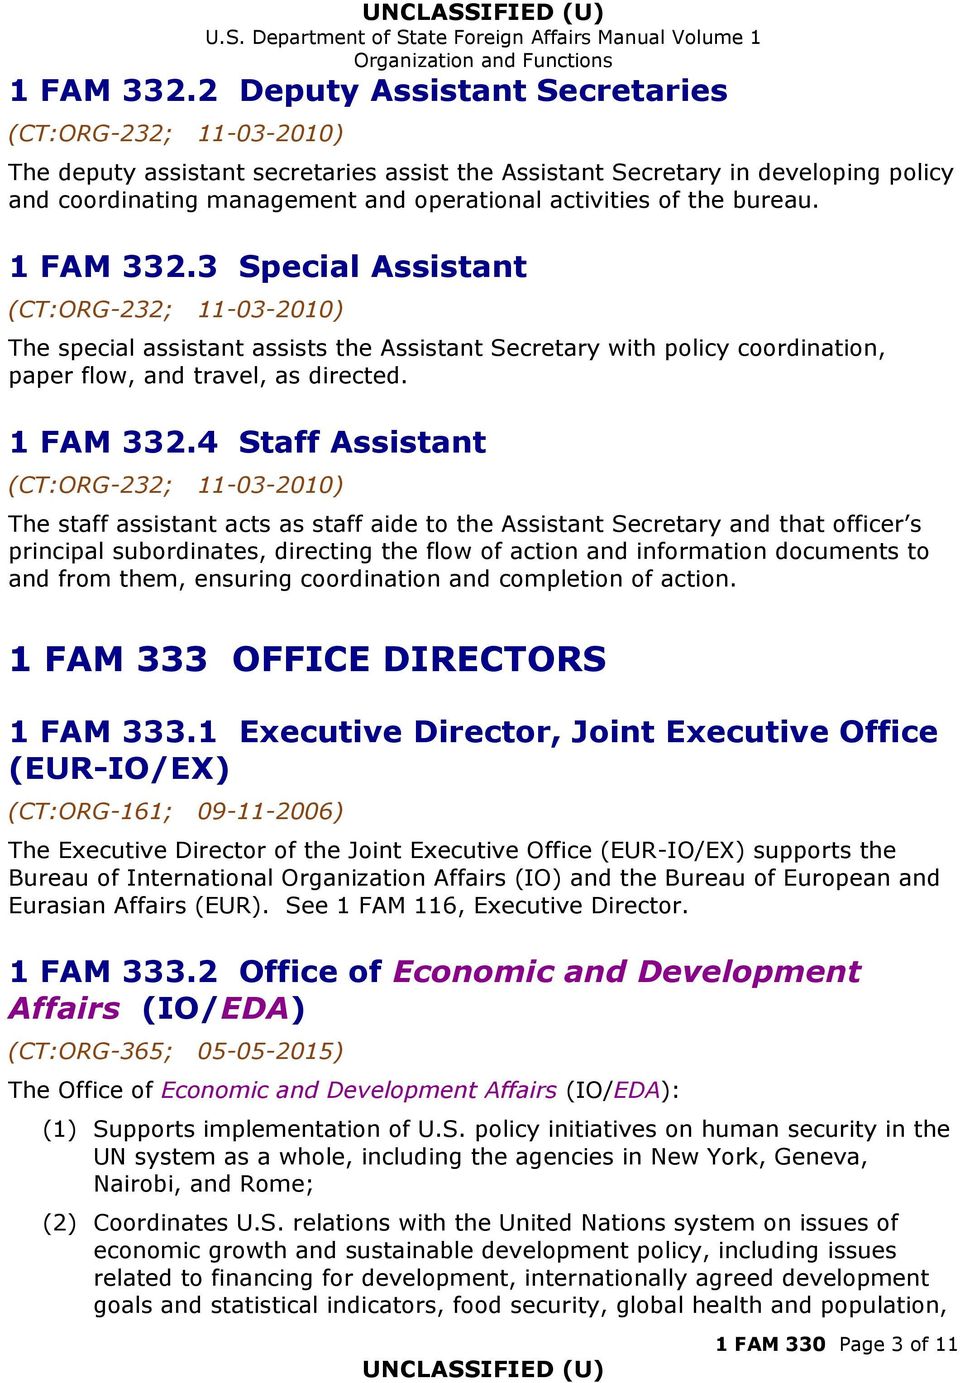 the bureau. 3 Special Assistant (CT:ORG-232; 11-03-2010) The special assistant assists the Assistant Secretary with policy coordination, paper flow, and travel, as directed.